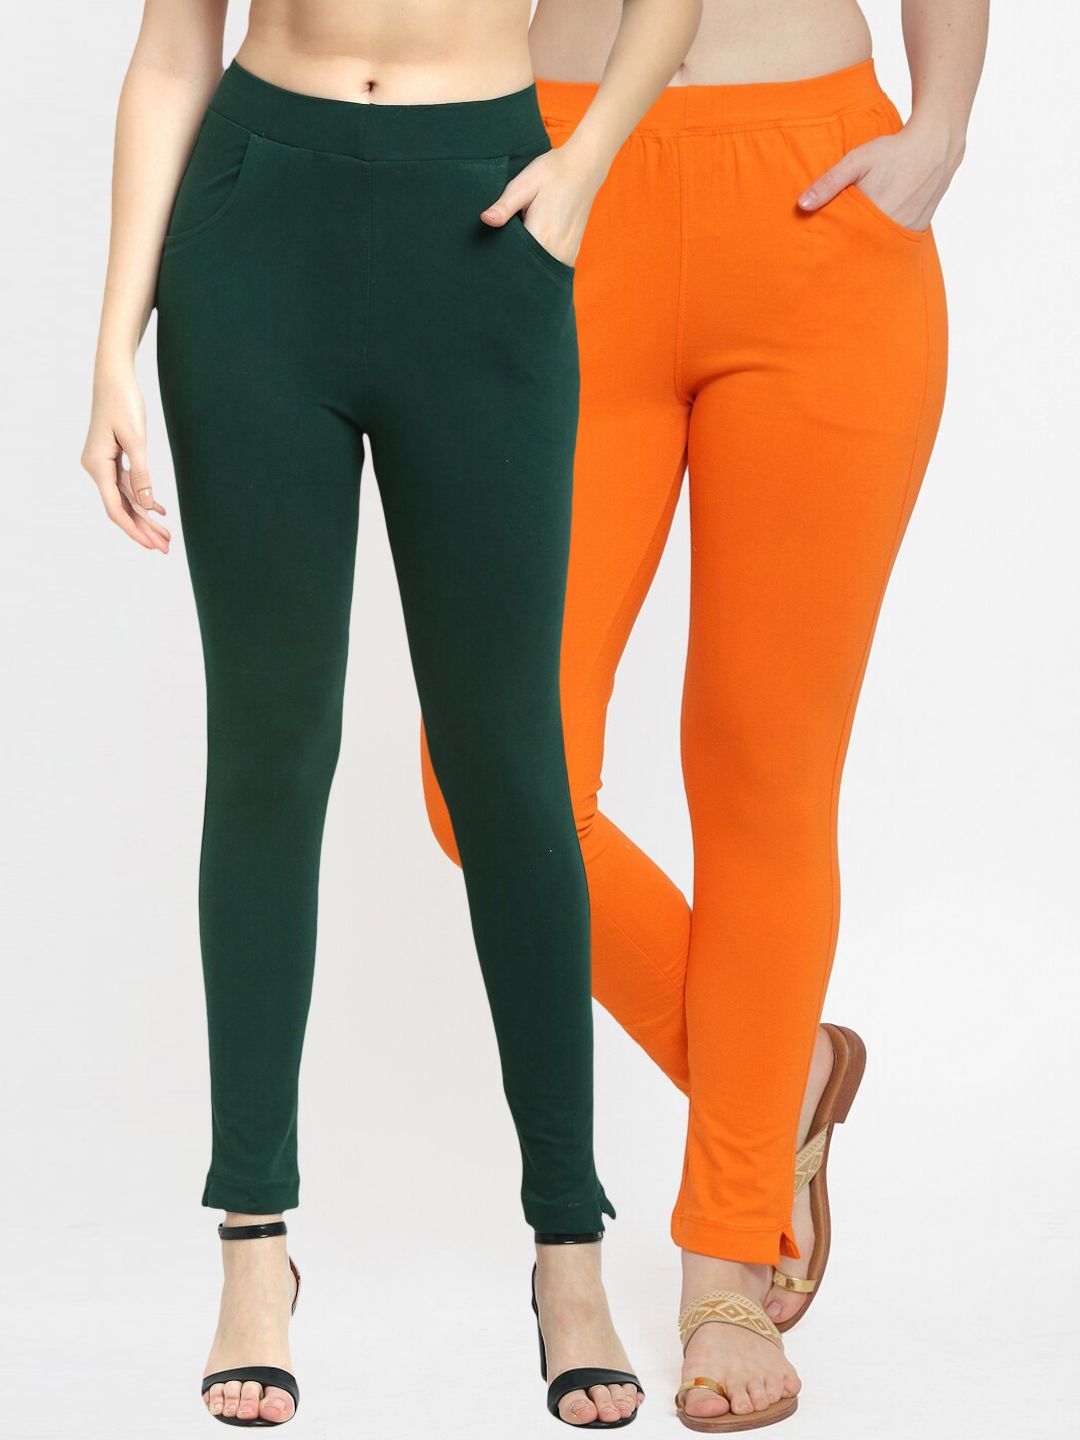 TAG 7 Women Set of 2 Green & Orange Solid Ankle-Length Leggings Price in India